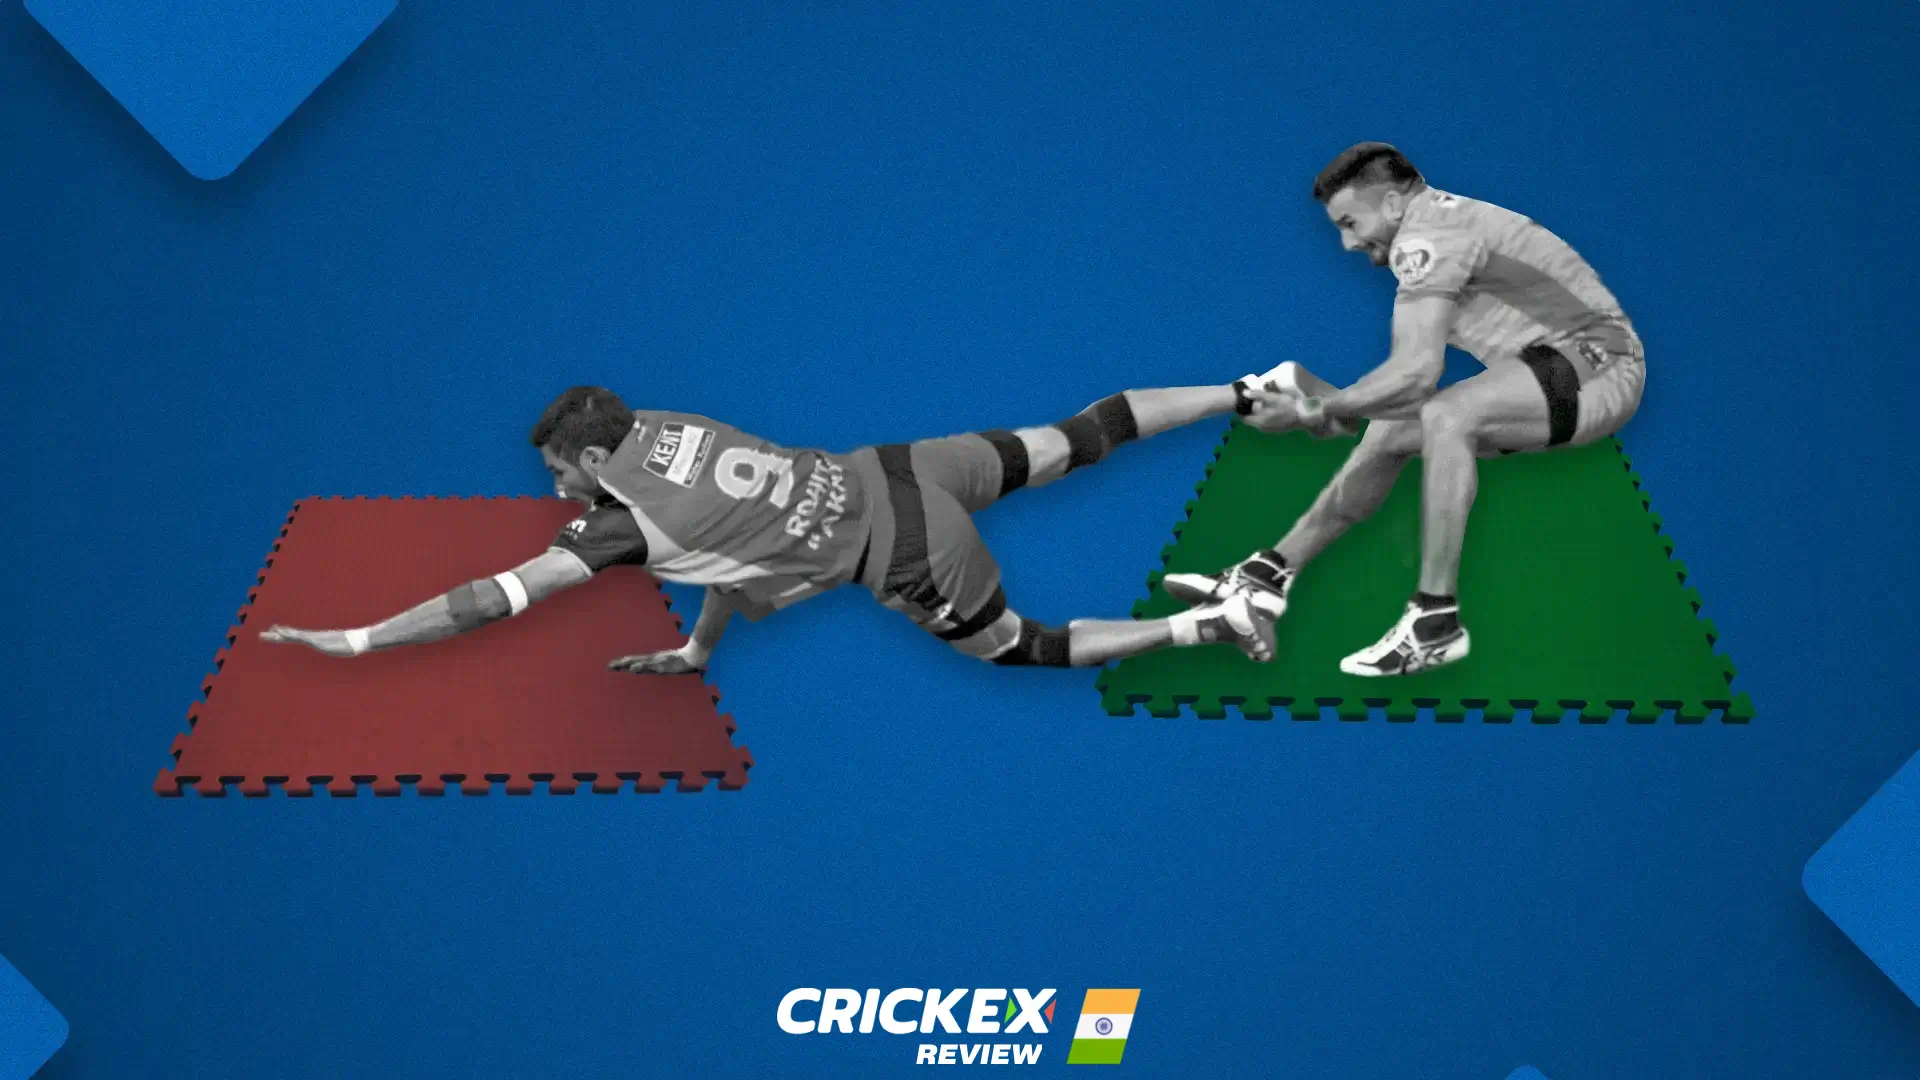 Bet on kabaddi and watch the match in real time with Crickex